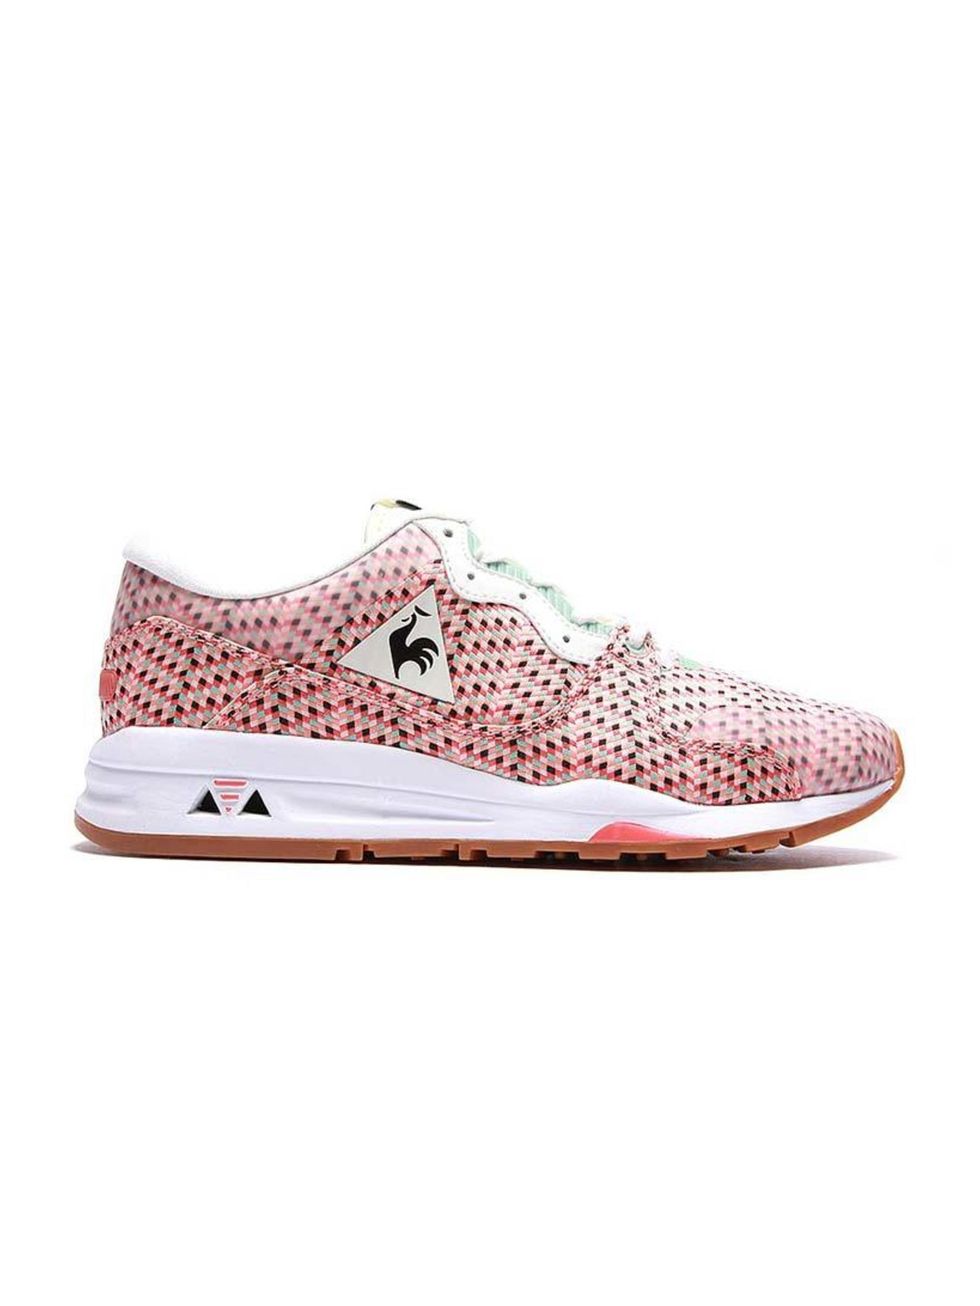 <p>This sudden sunny spell means freedom for our claustrophobic ankles.</p>

<p>Le Coq Sportif trainers, £79.99 at <a href="http://www.footasylum.com/le-coq-sportif-womens-lcs-r-1400-jacquard-trainer-088338/" target="_blank">Foot Asylum</a></p>